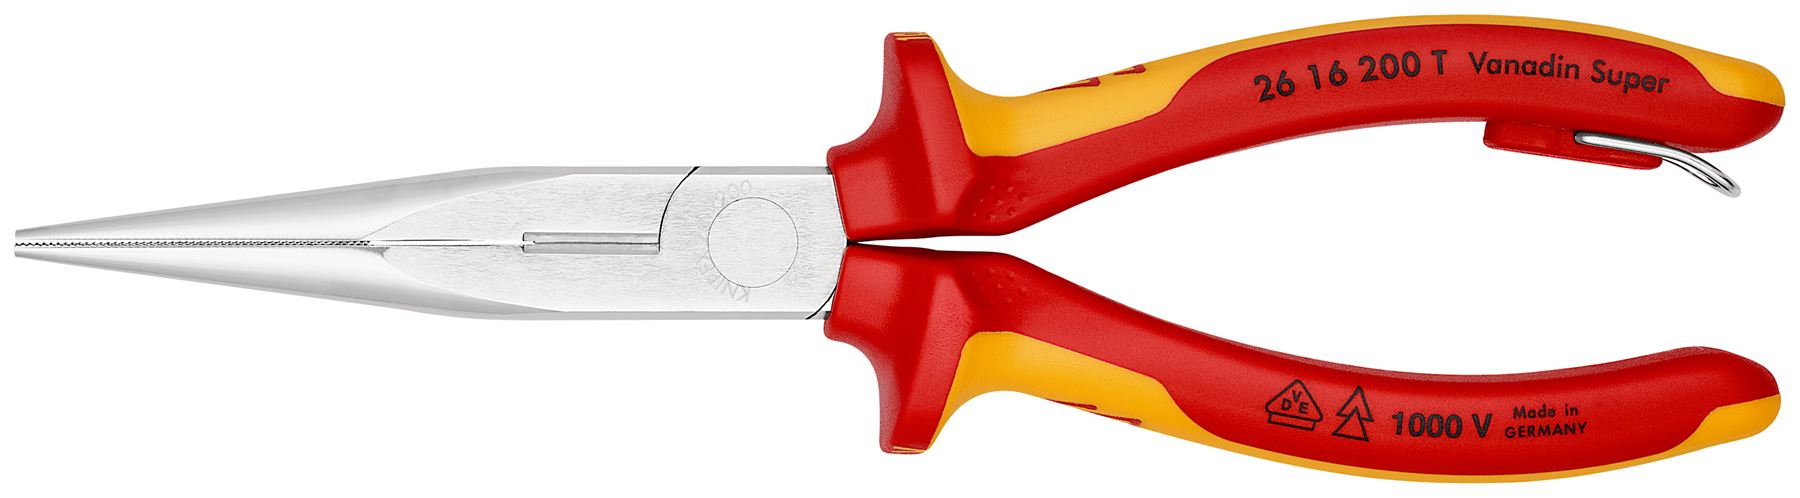 Knipex Snipe Nose Side Cutting Pliers Stork Beak Plier 200mm VDE Insulated 1000V Tether Point 26 16 200 T